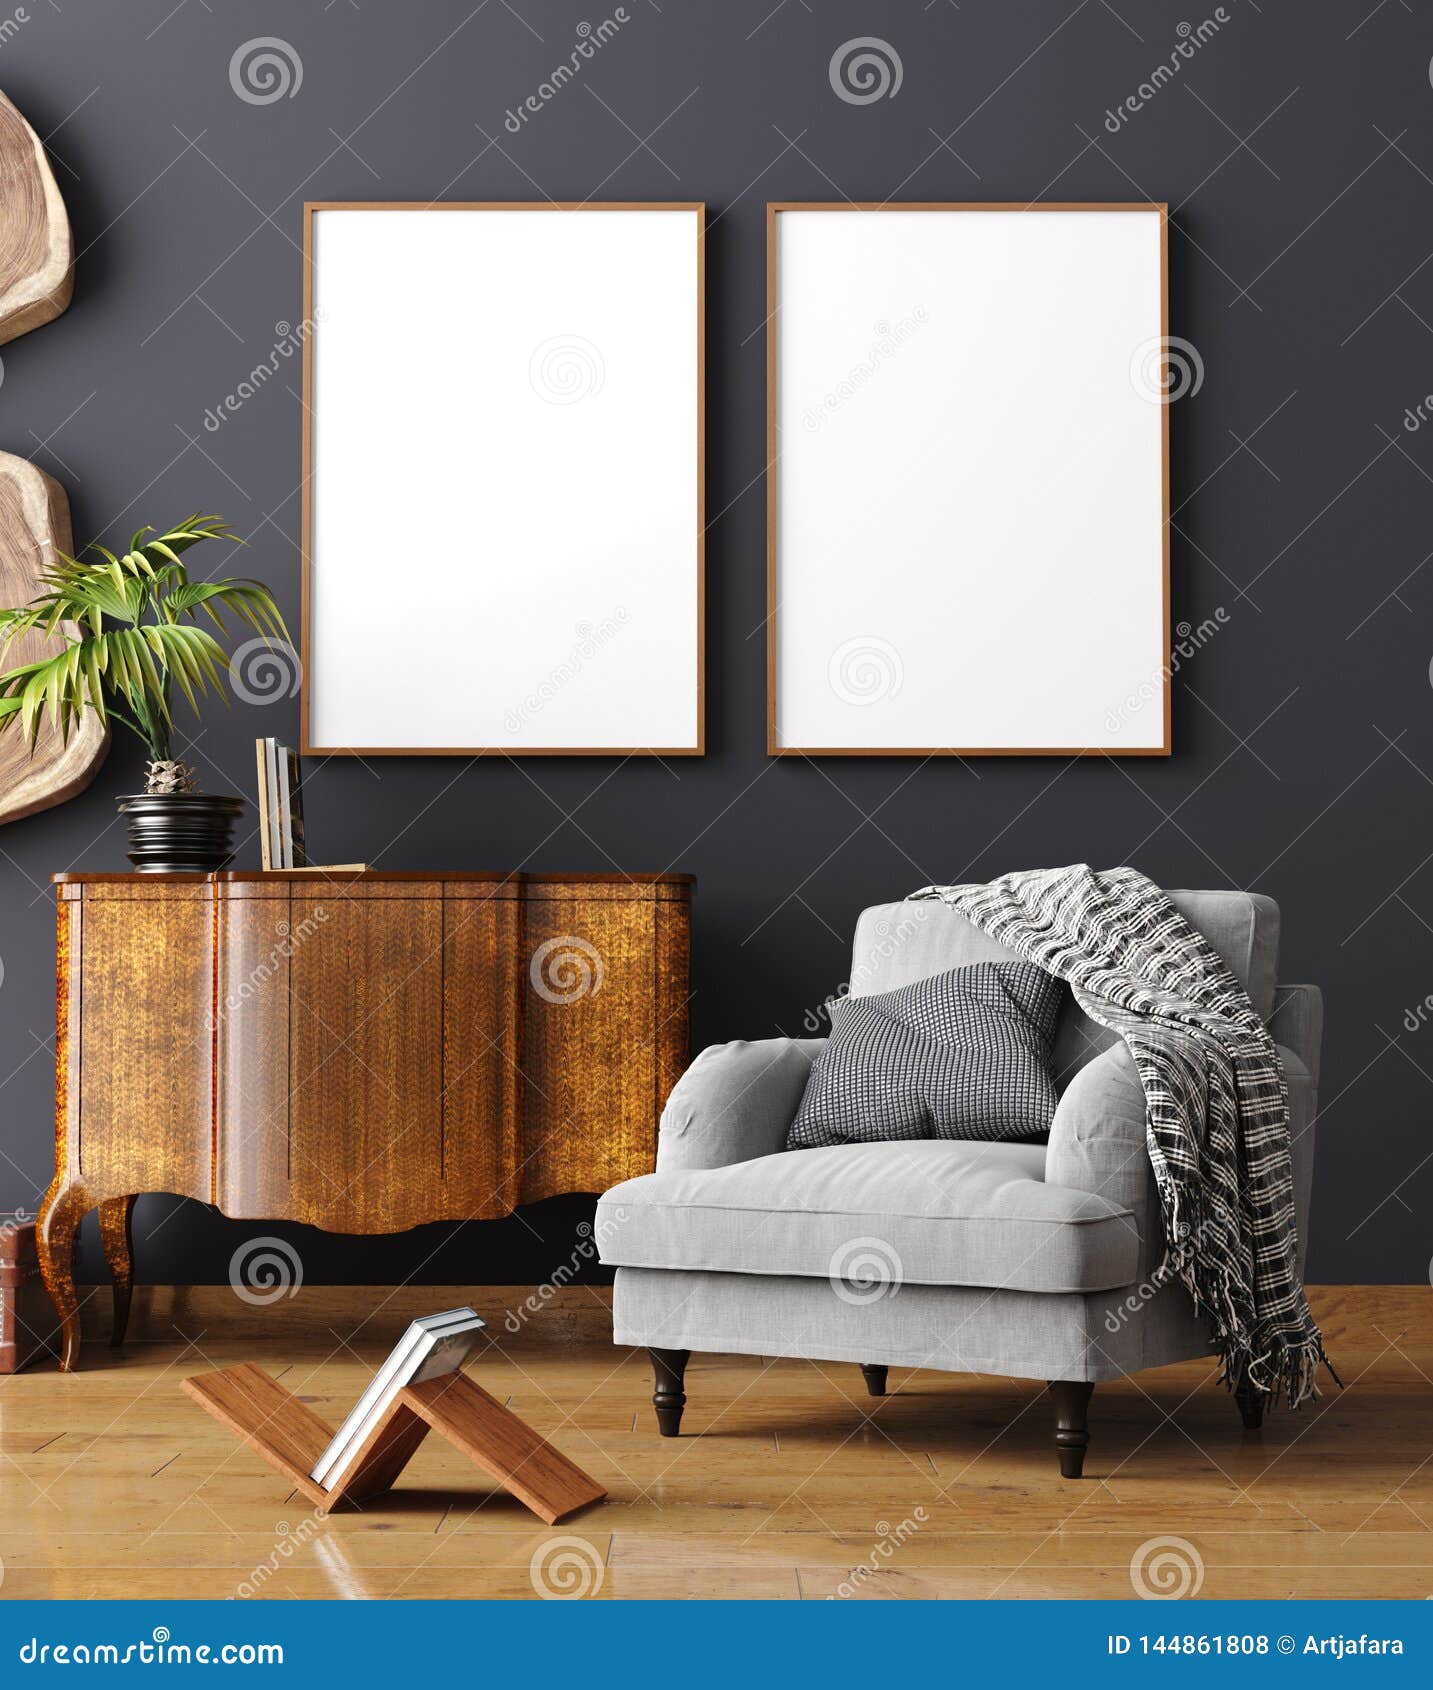 mock up poster frame in home interior background, scandinavian style